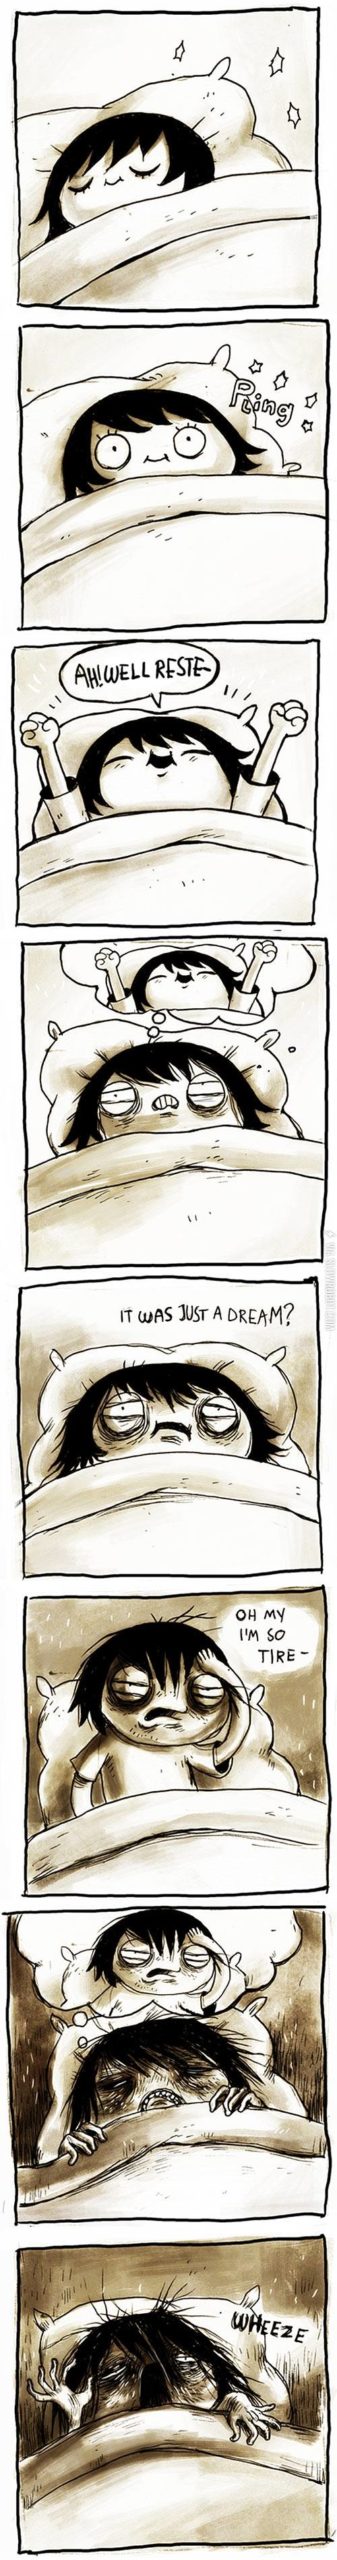 Every+morning.